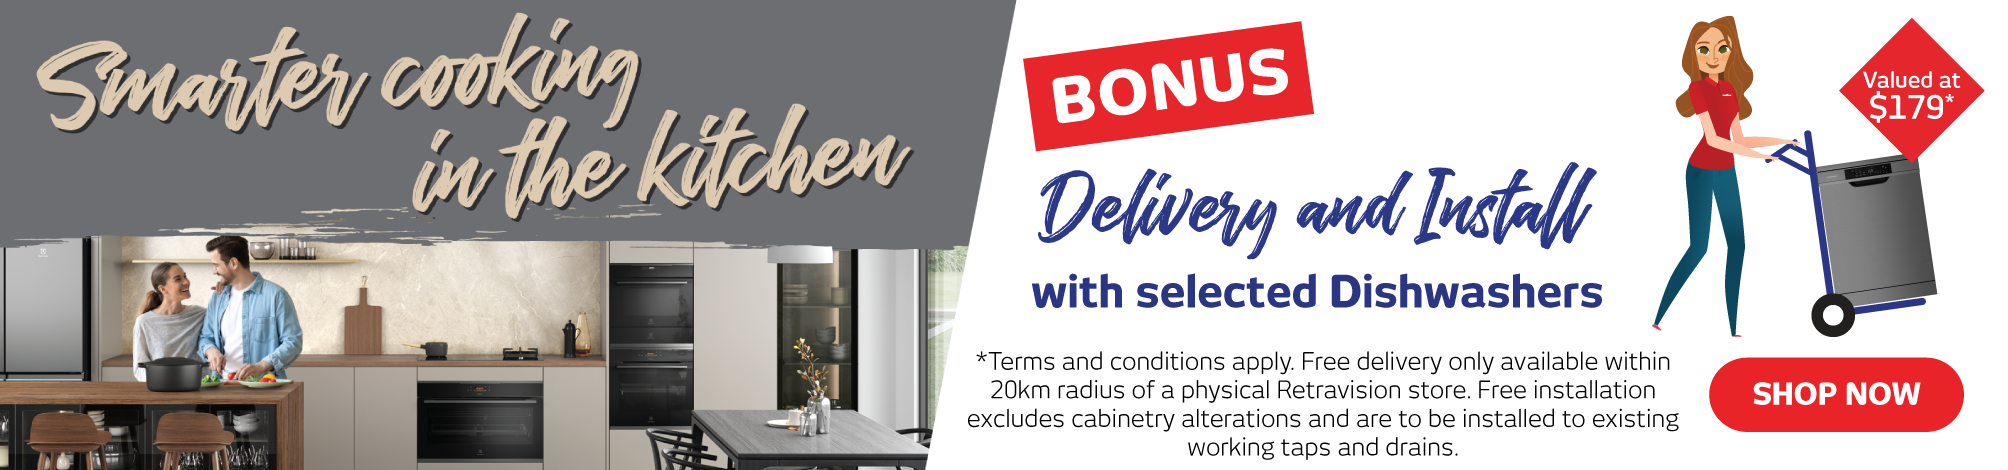 Electrolux & Westinghouse Cooking Guide - Bonus Delivery & Install with selected dishwashers